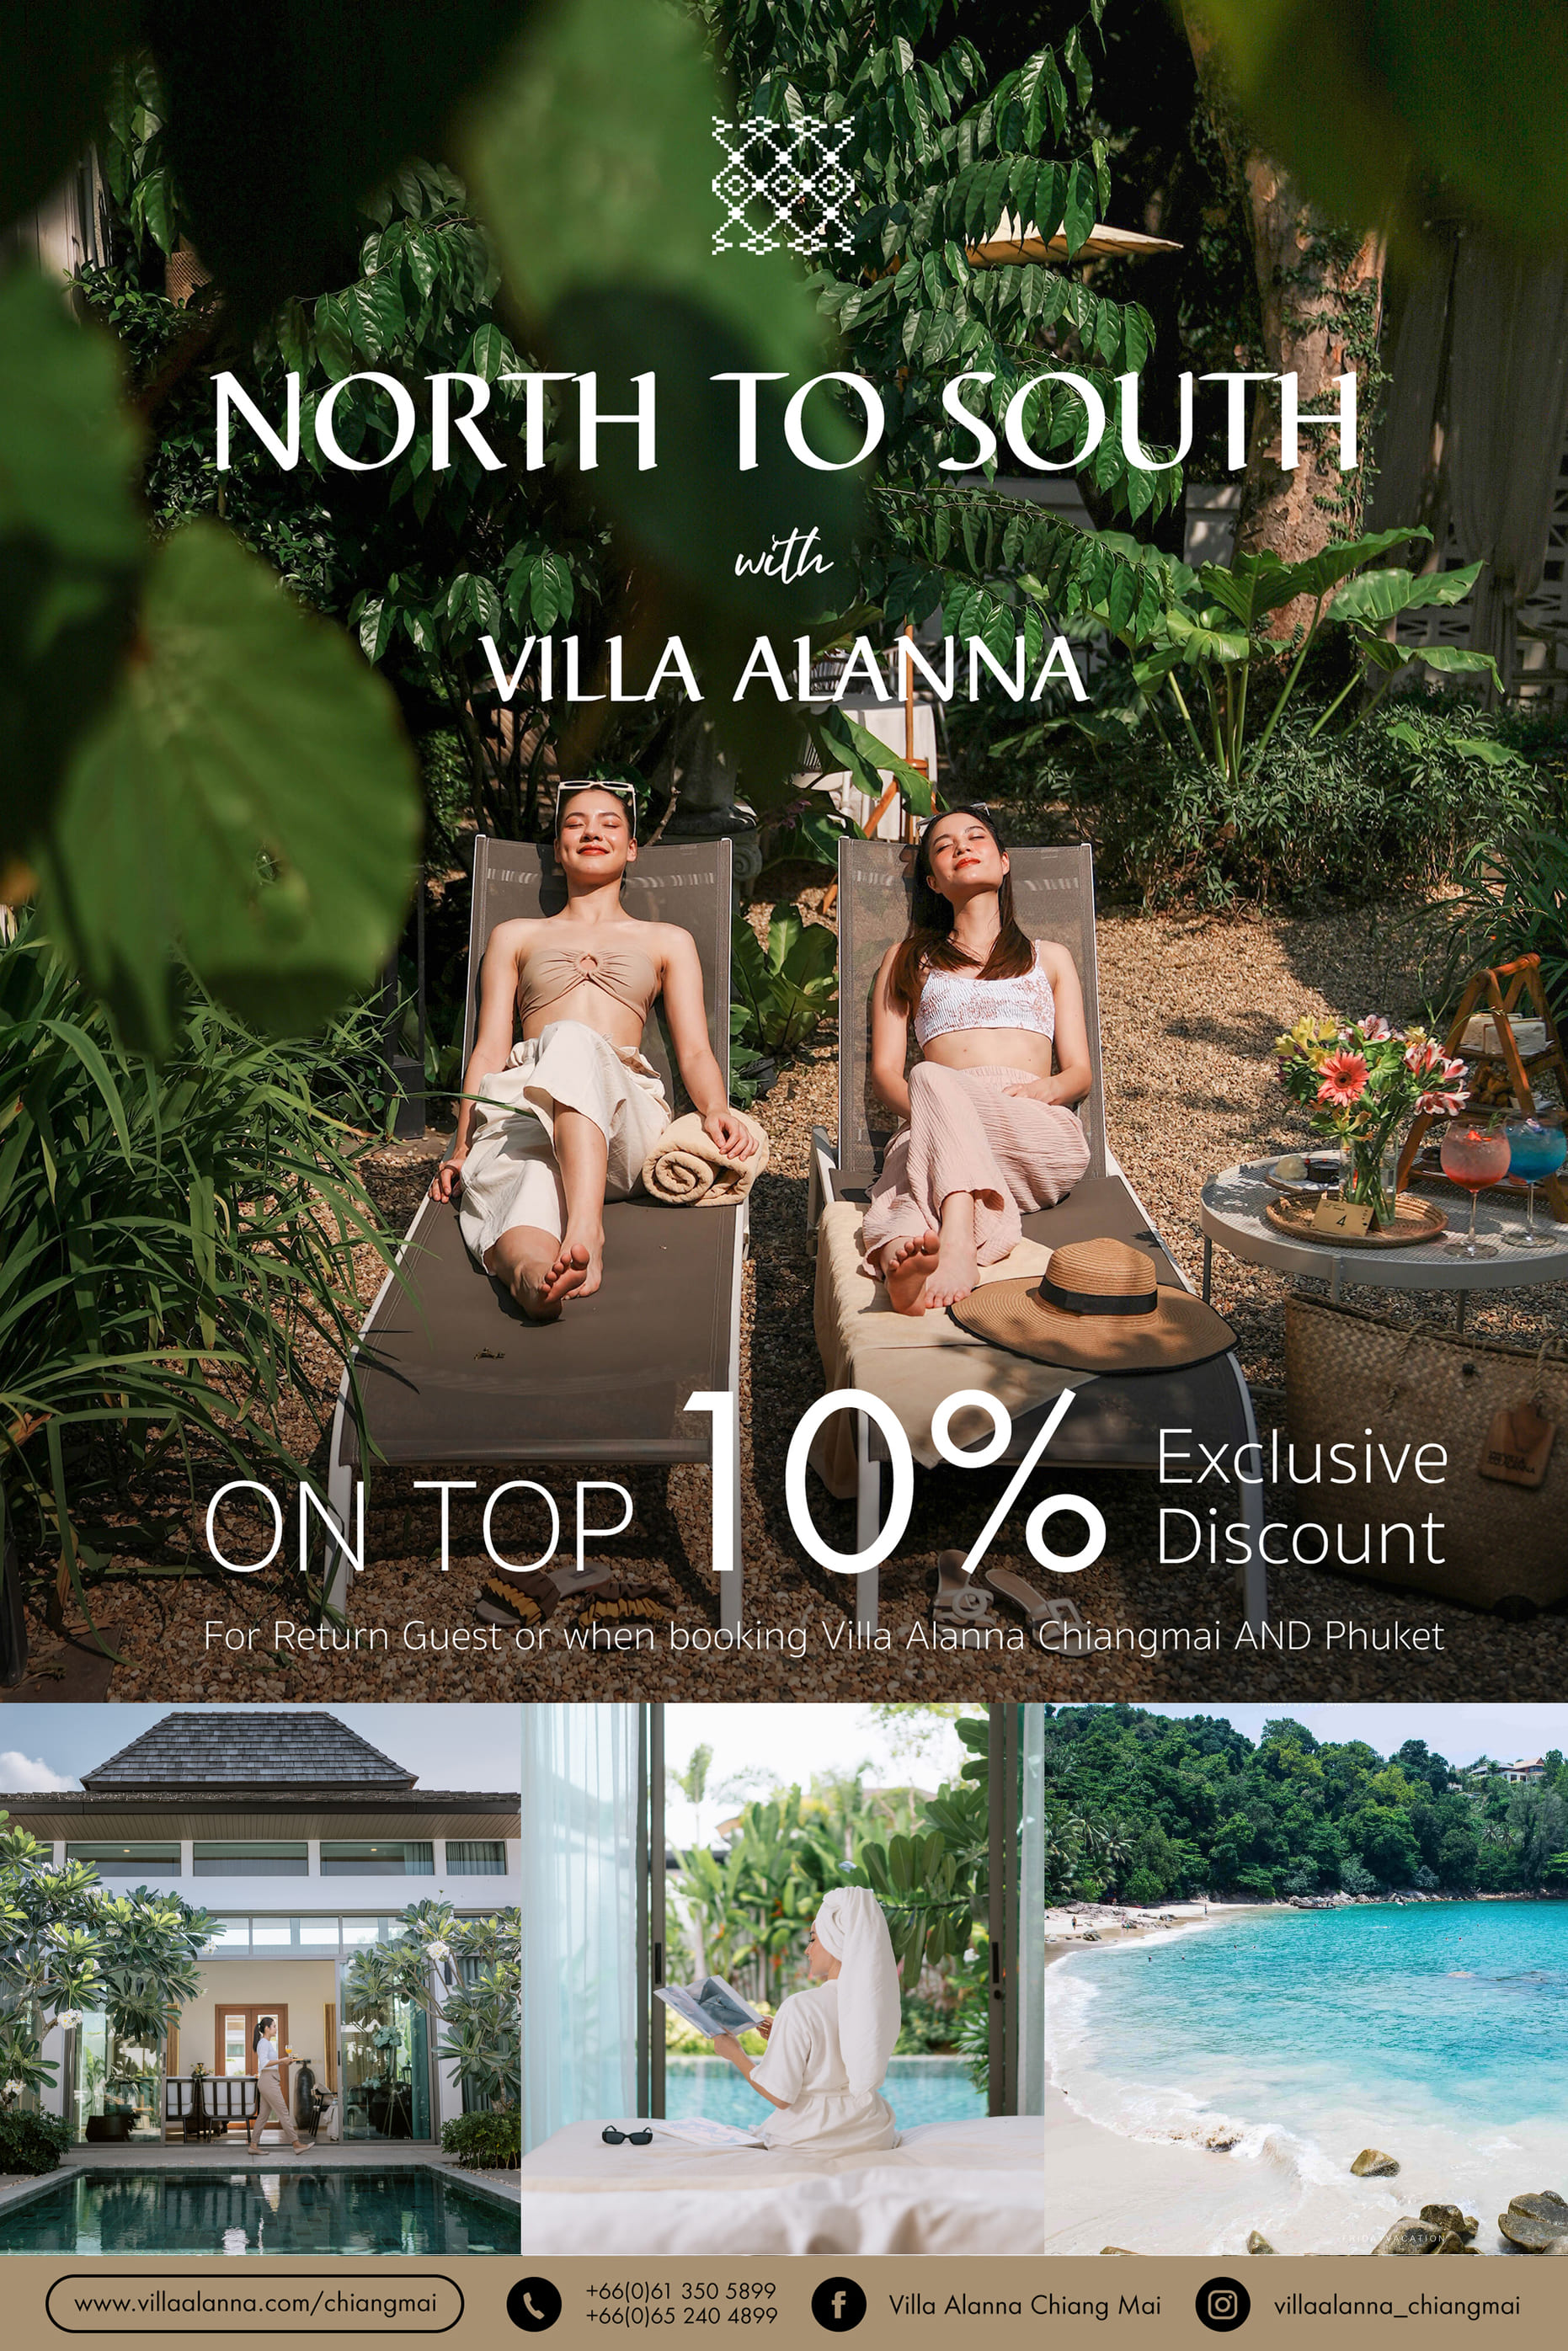 North to South with Villa Alanna